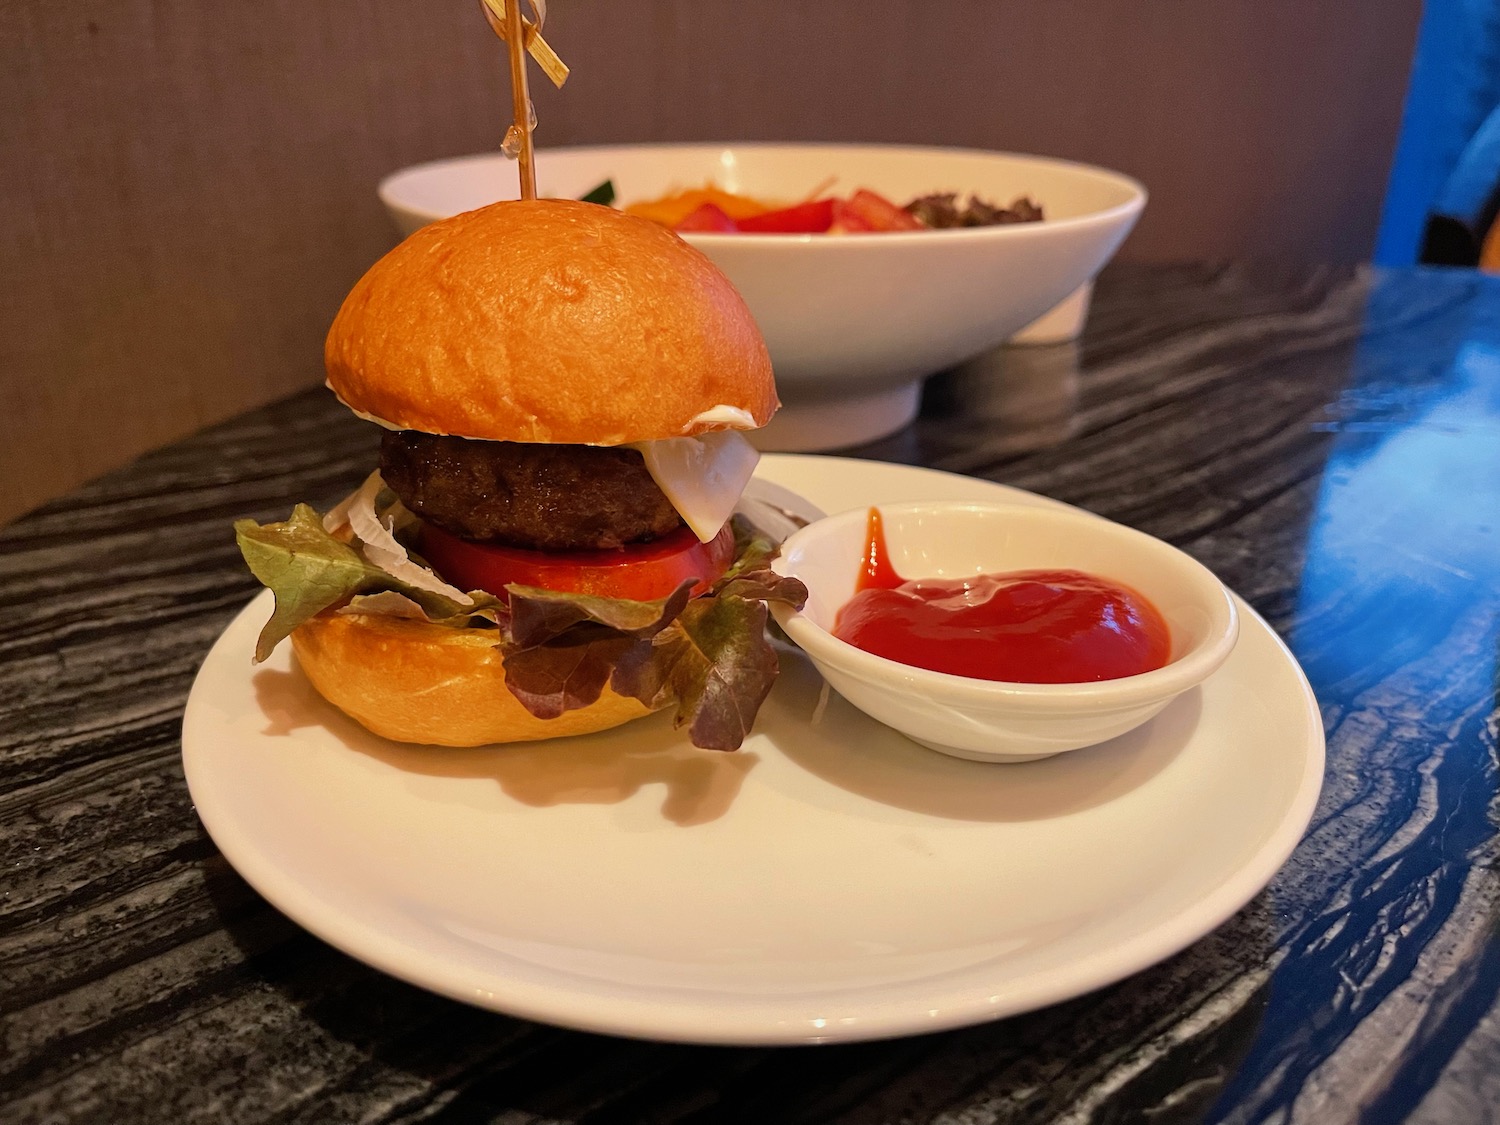 a burger on a plate with a small bowl of ketchup